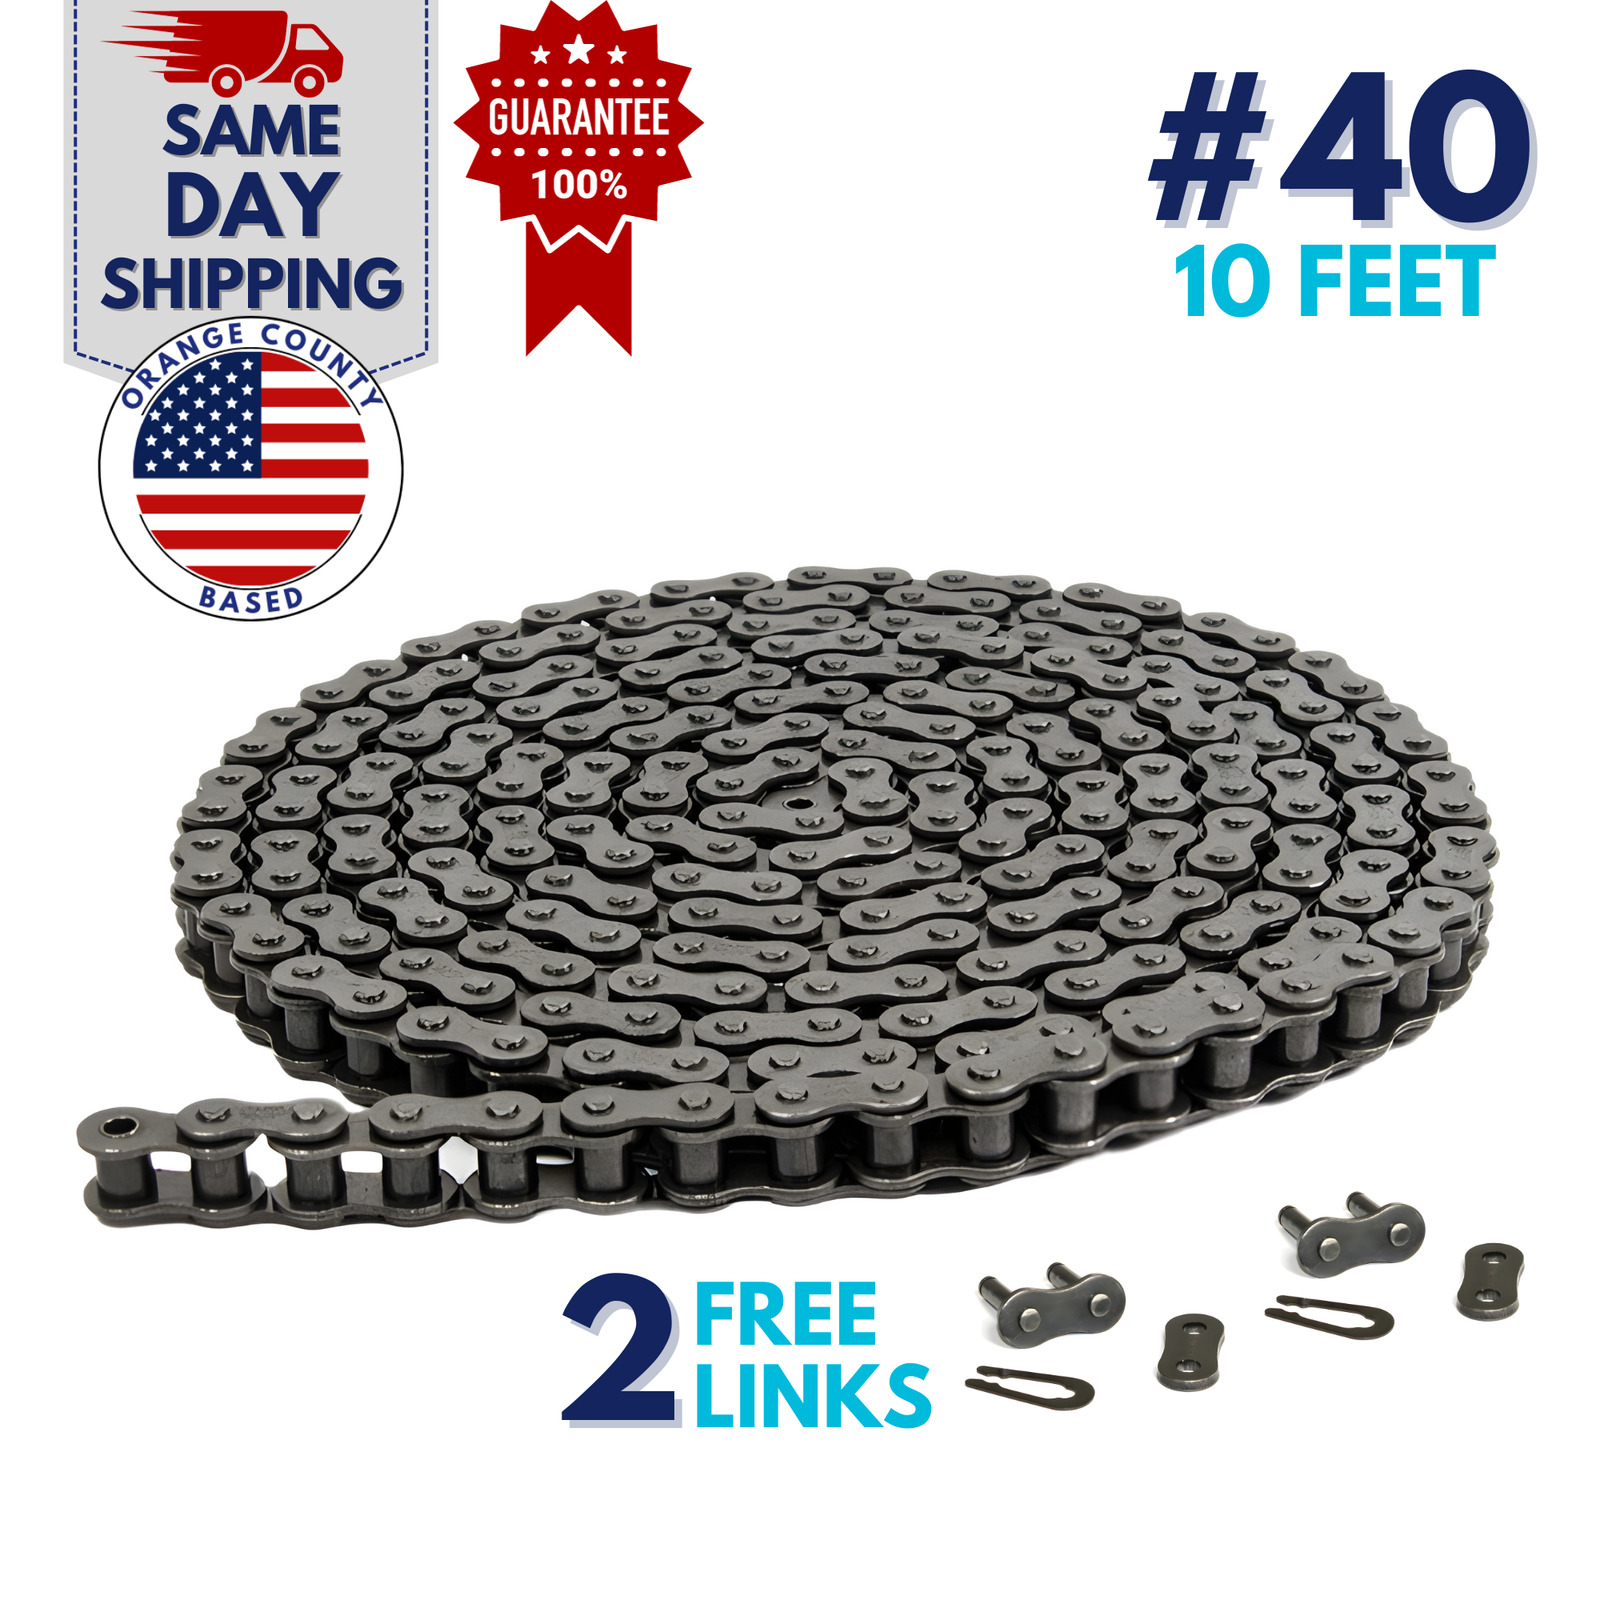 #40 Roller Chain 10 Feet with 2 Connecting Links